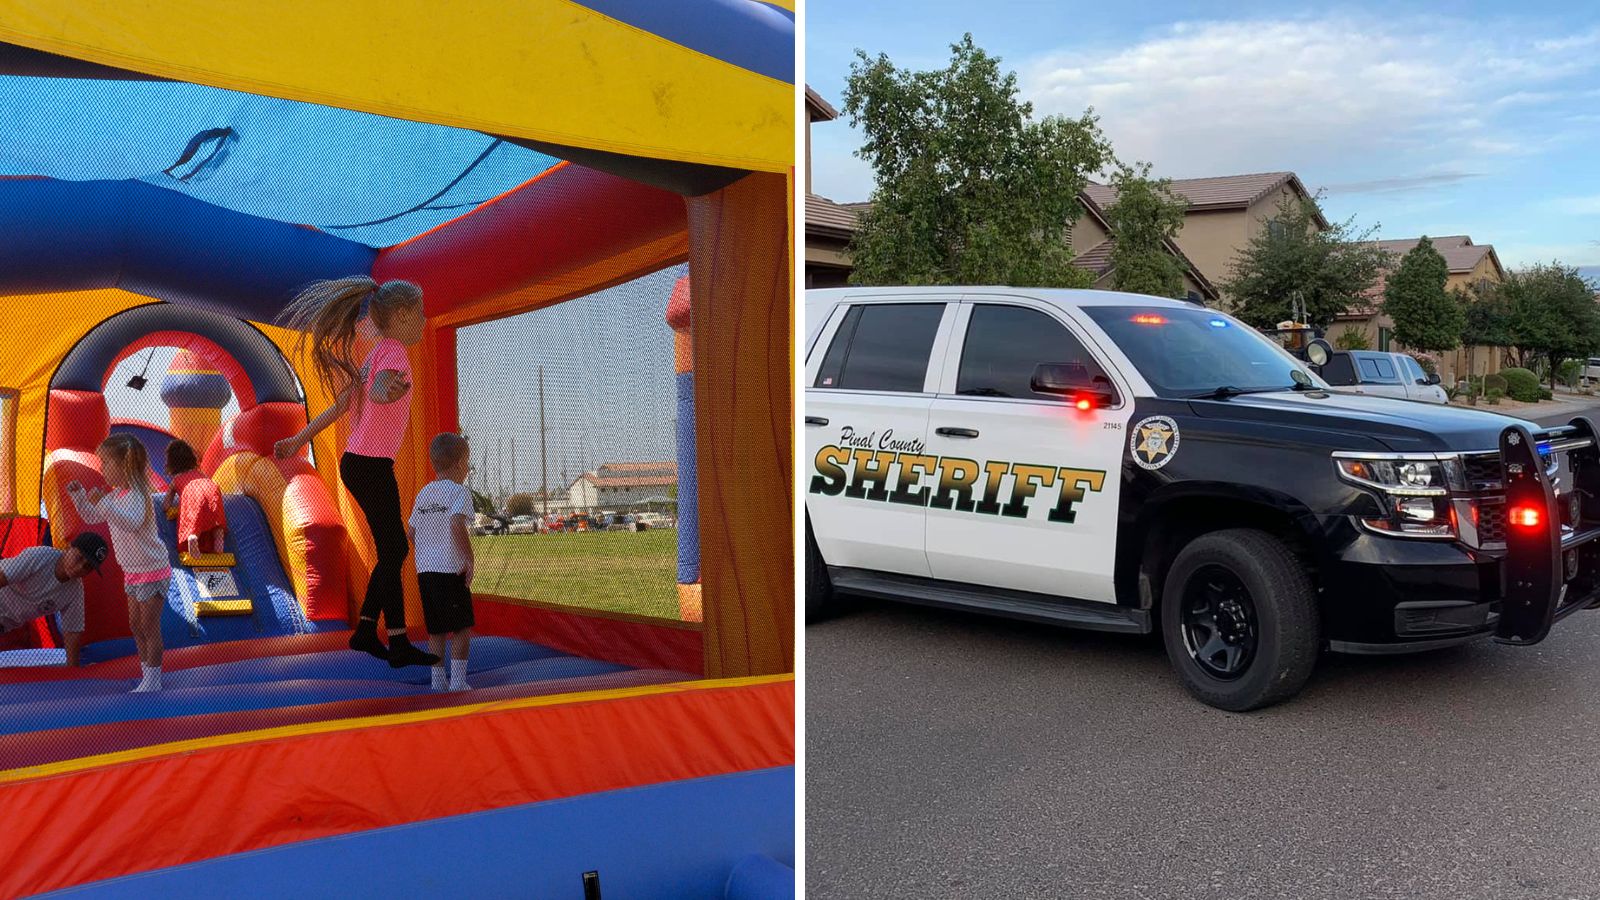 Bounce house flies into air: 1 child dead, another hospitalized...